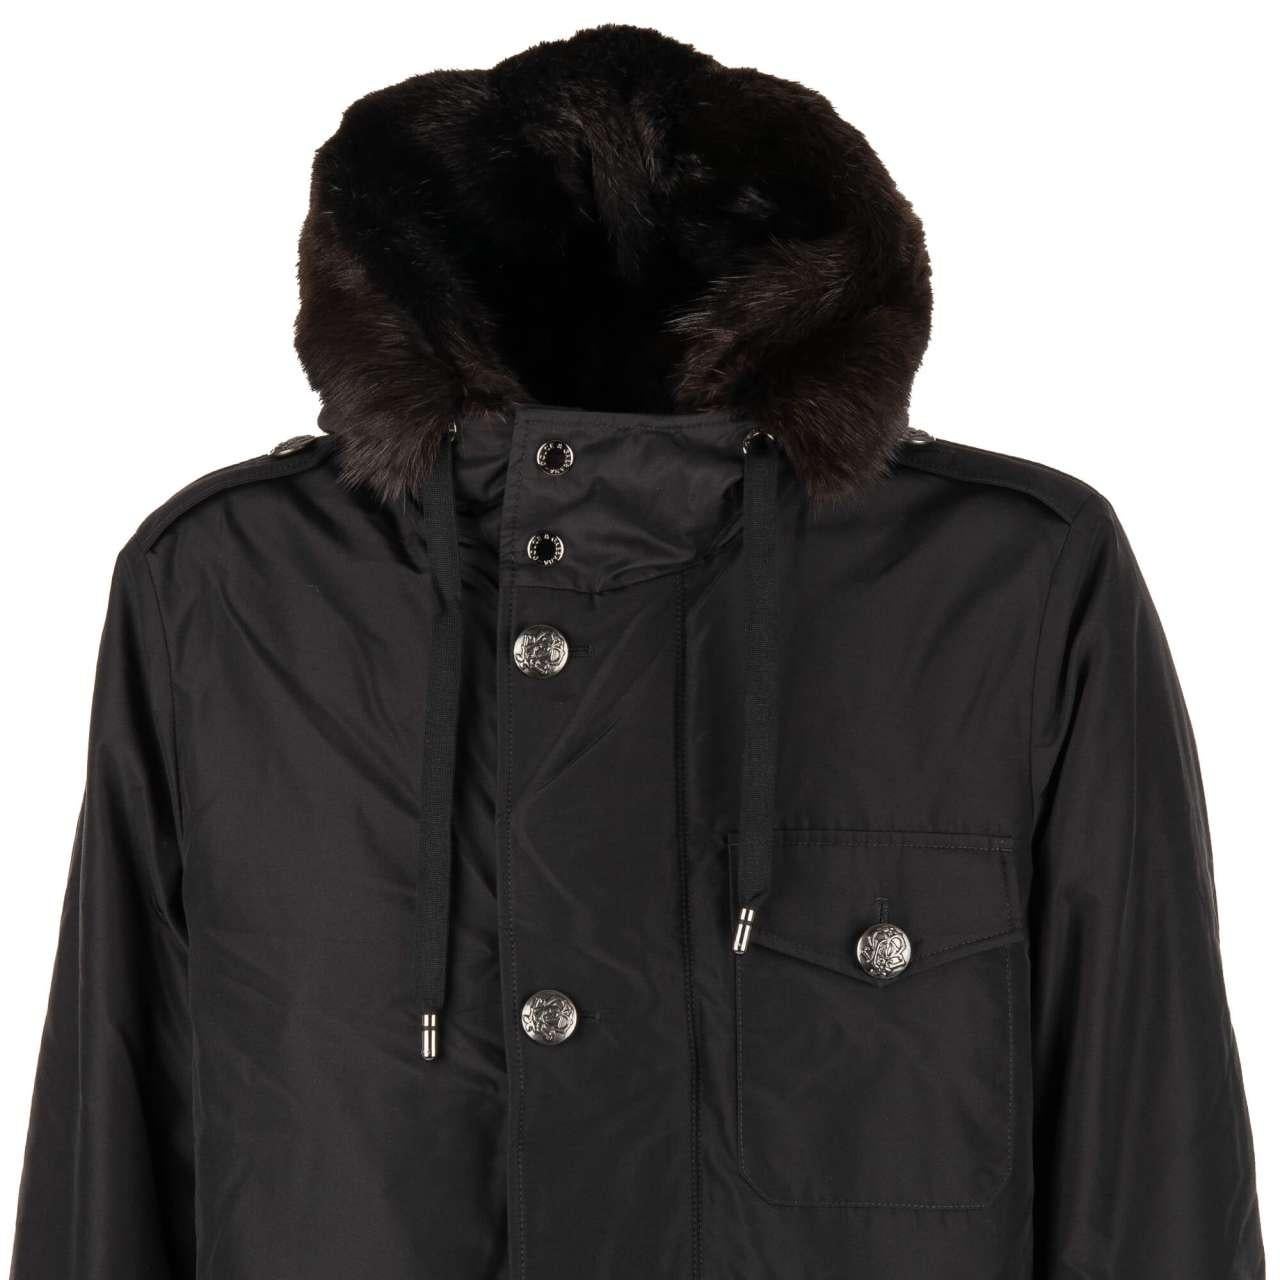 Dolce & Gabbana Silk Parka Jacket with Detachable Fur Lining and Hoody Black 56 For Sale 5